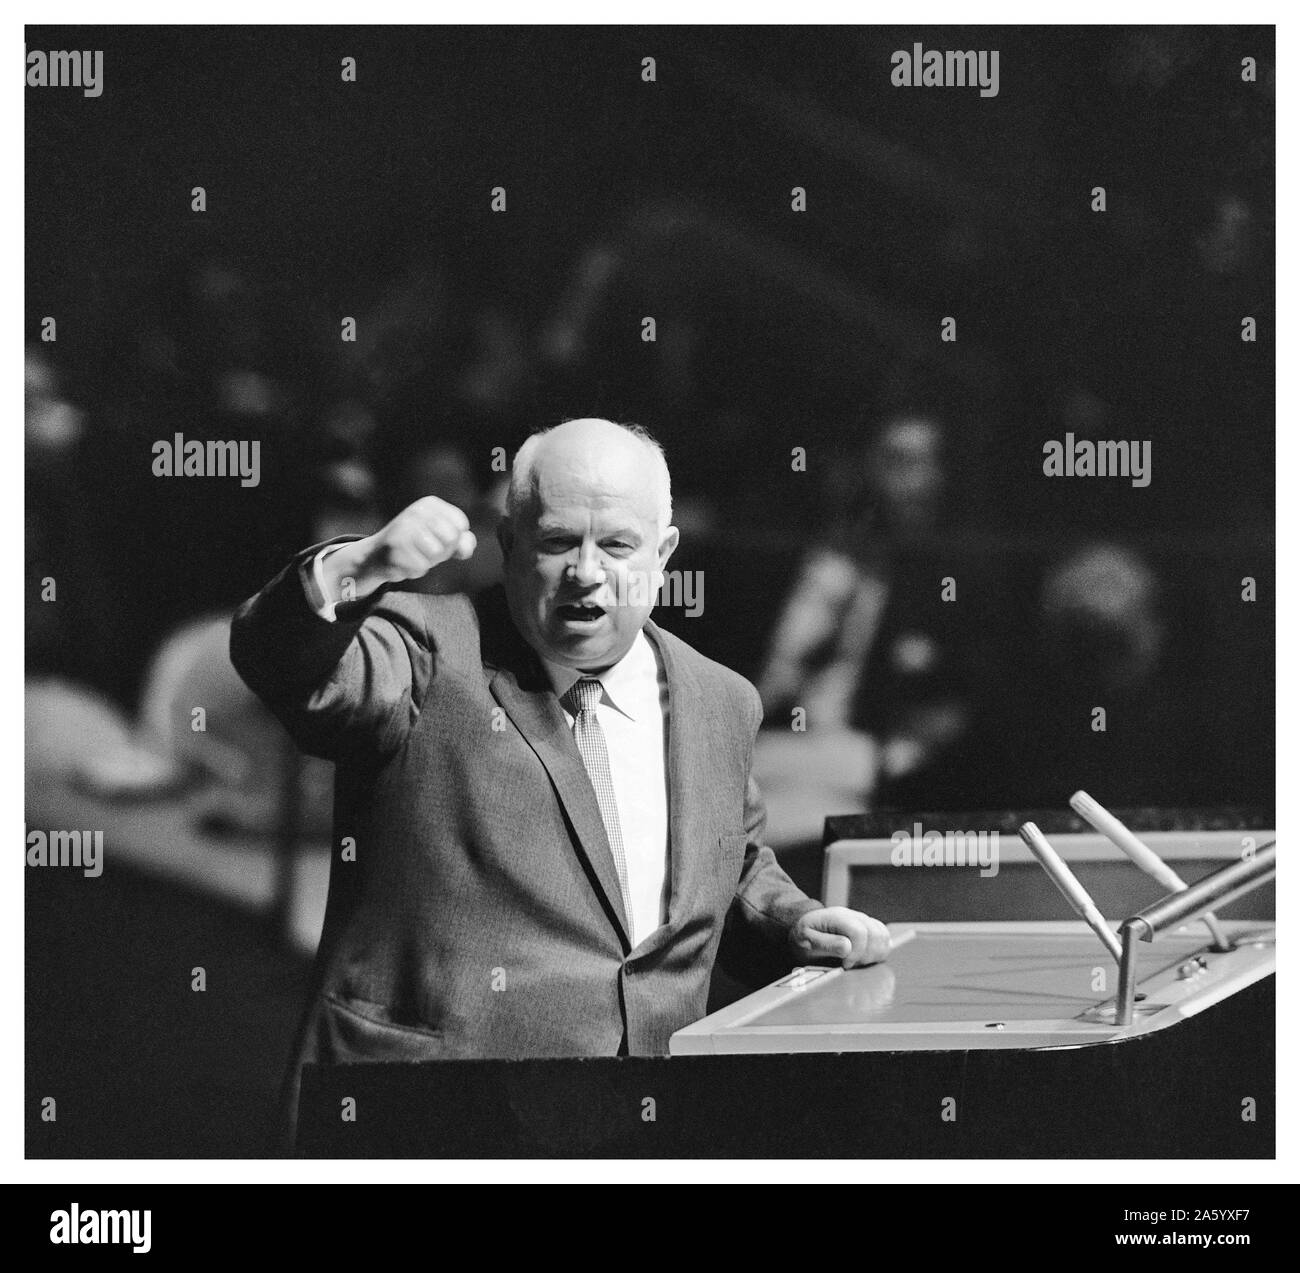 Photograph of Nikita Khrushchev (1894-1971) Russian politician who led the Soviet Union during part of the Cold War. Dated 1960 Stock Photo